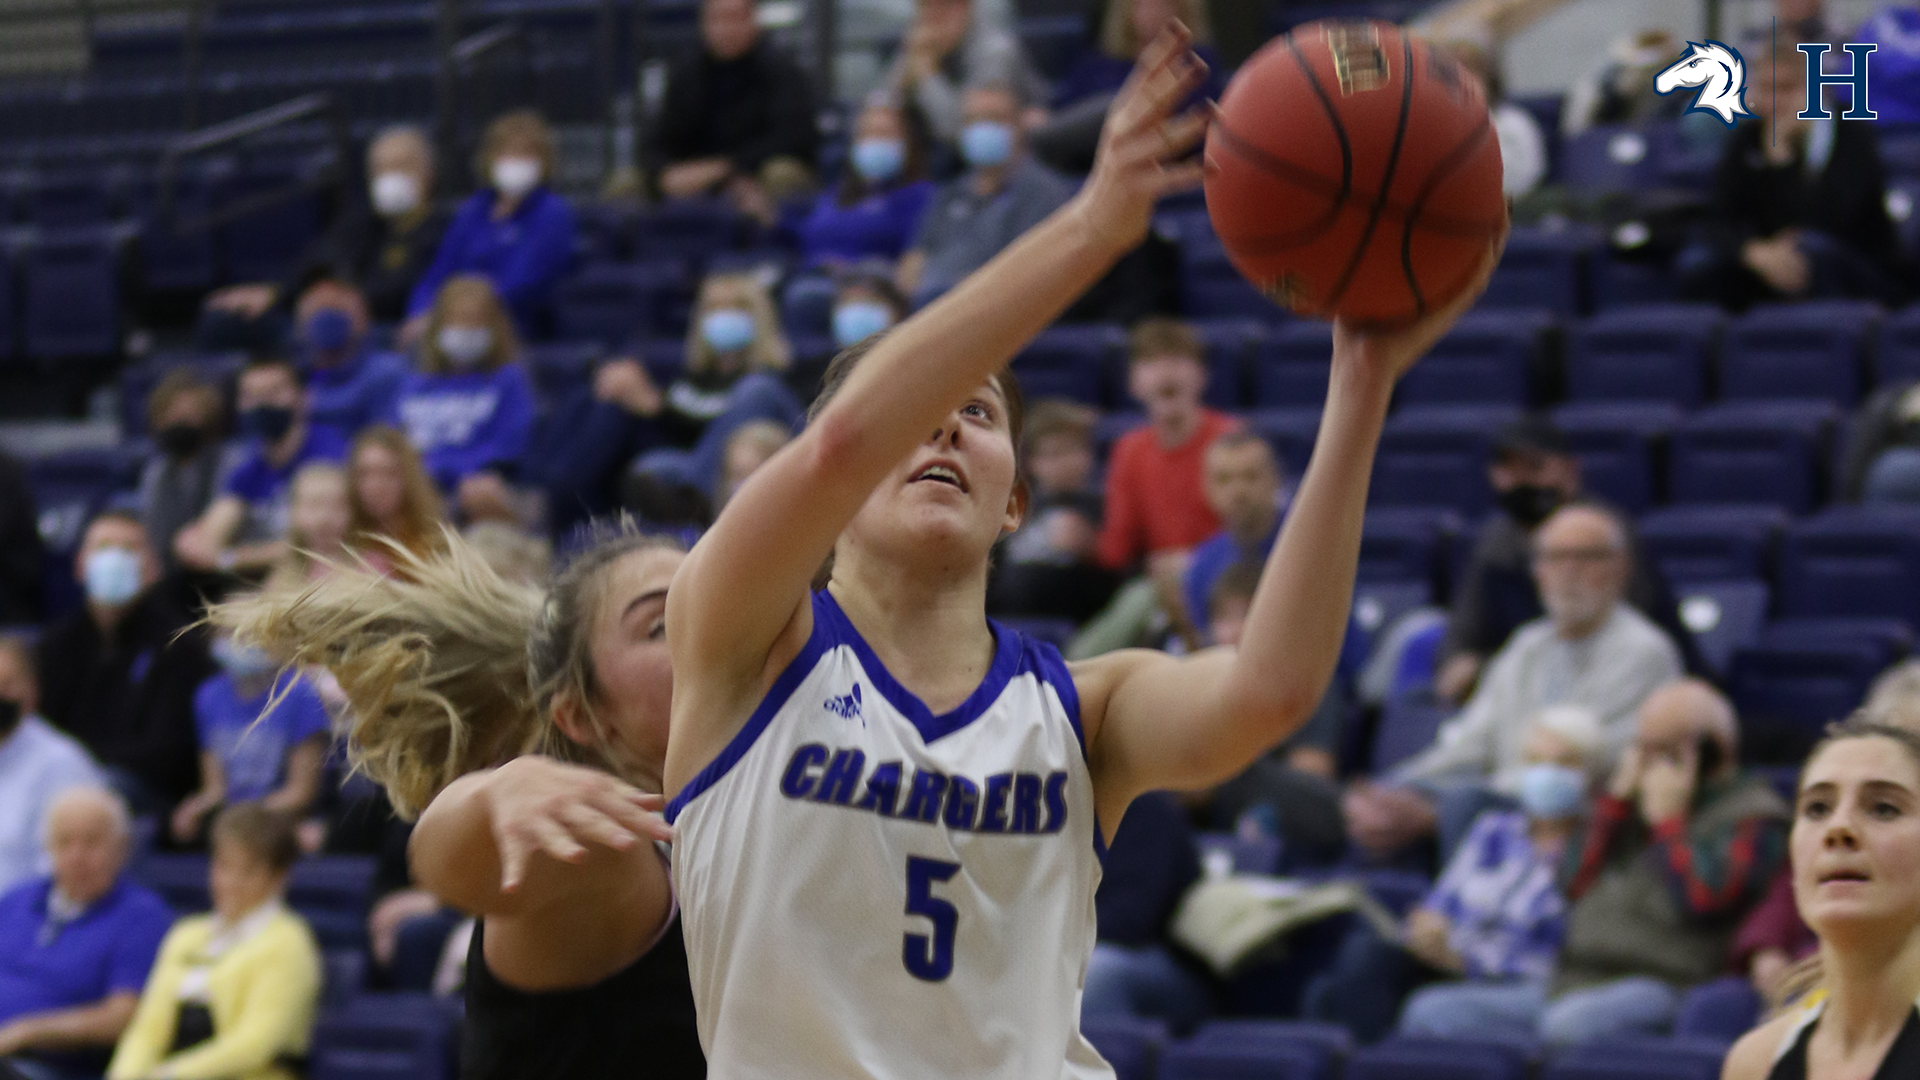 Charger women just miss on upset bid against Ohio Dominican, 87-80